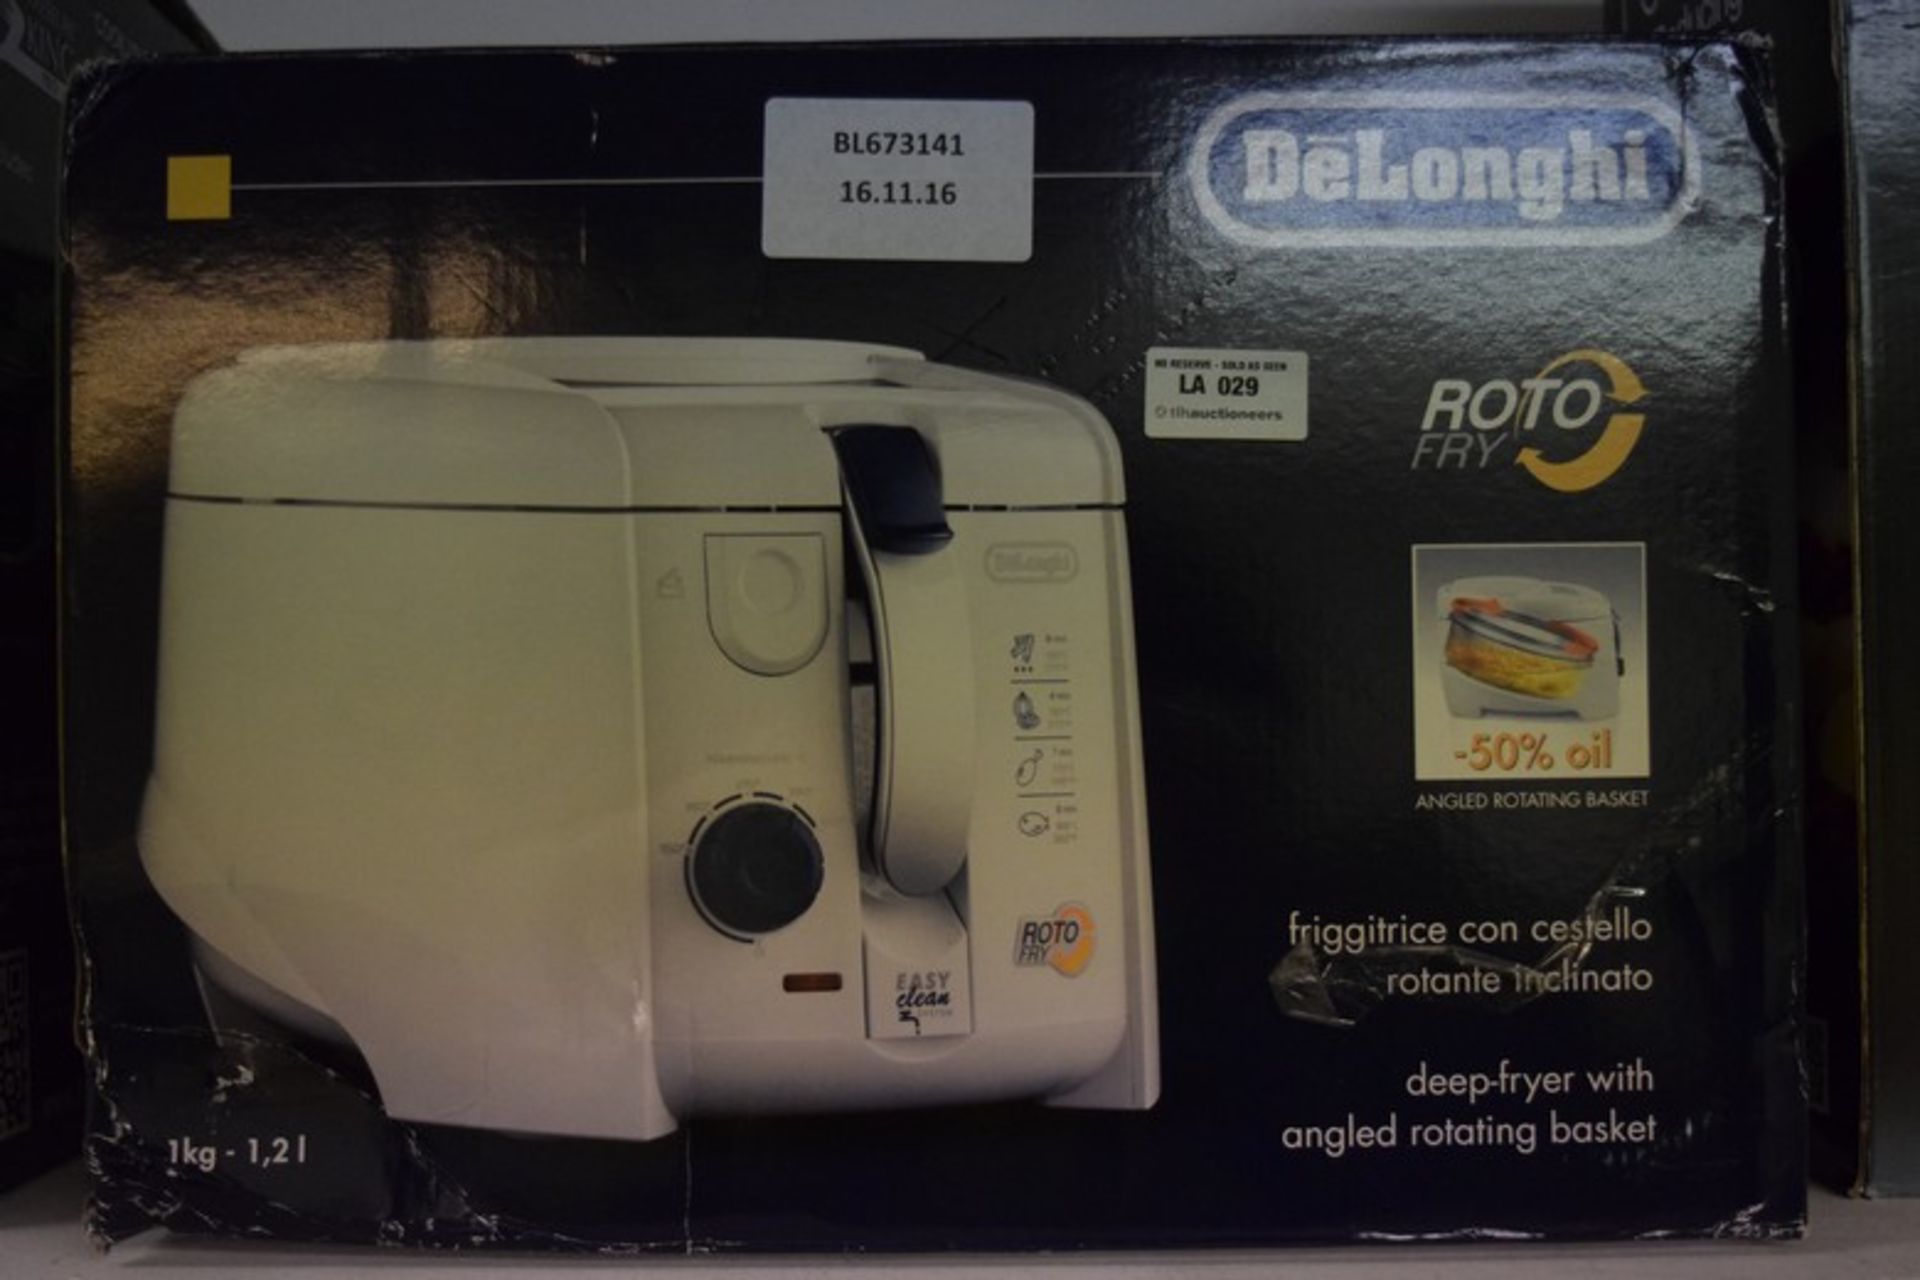 1 x BOXED DELONGHI ROTO FRY DEEP FRYER WITH ANGLED ROTATING BASKET RRP £60 16/11/16 *PLEASE NOTE